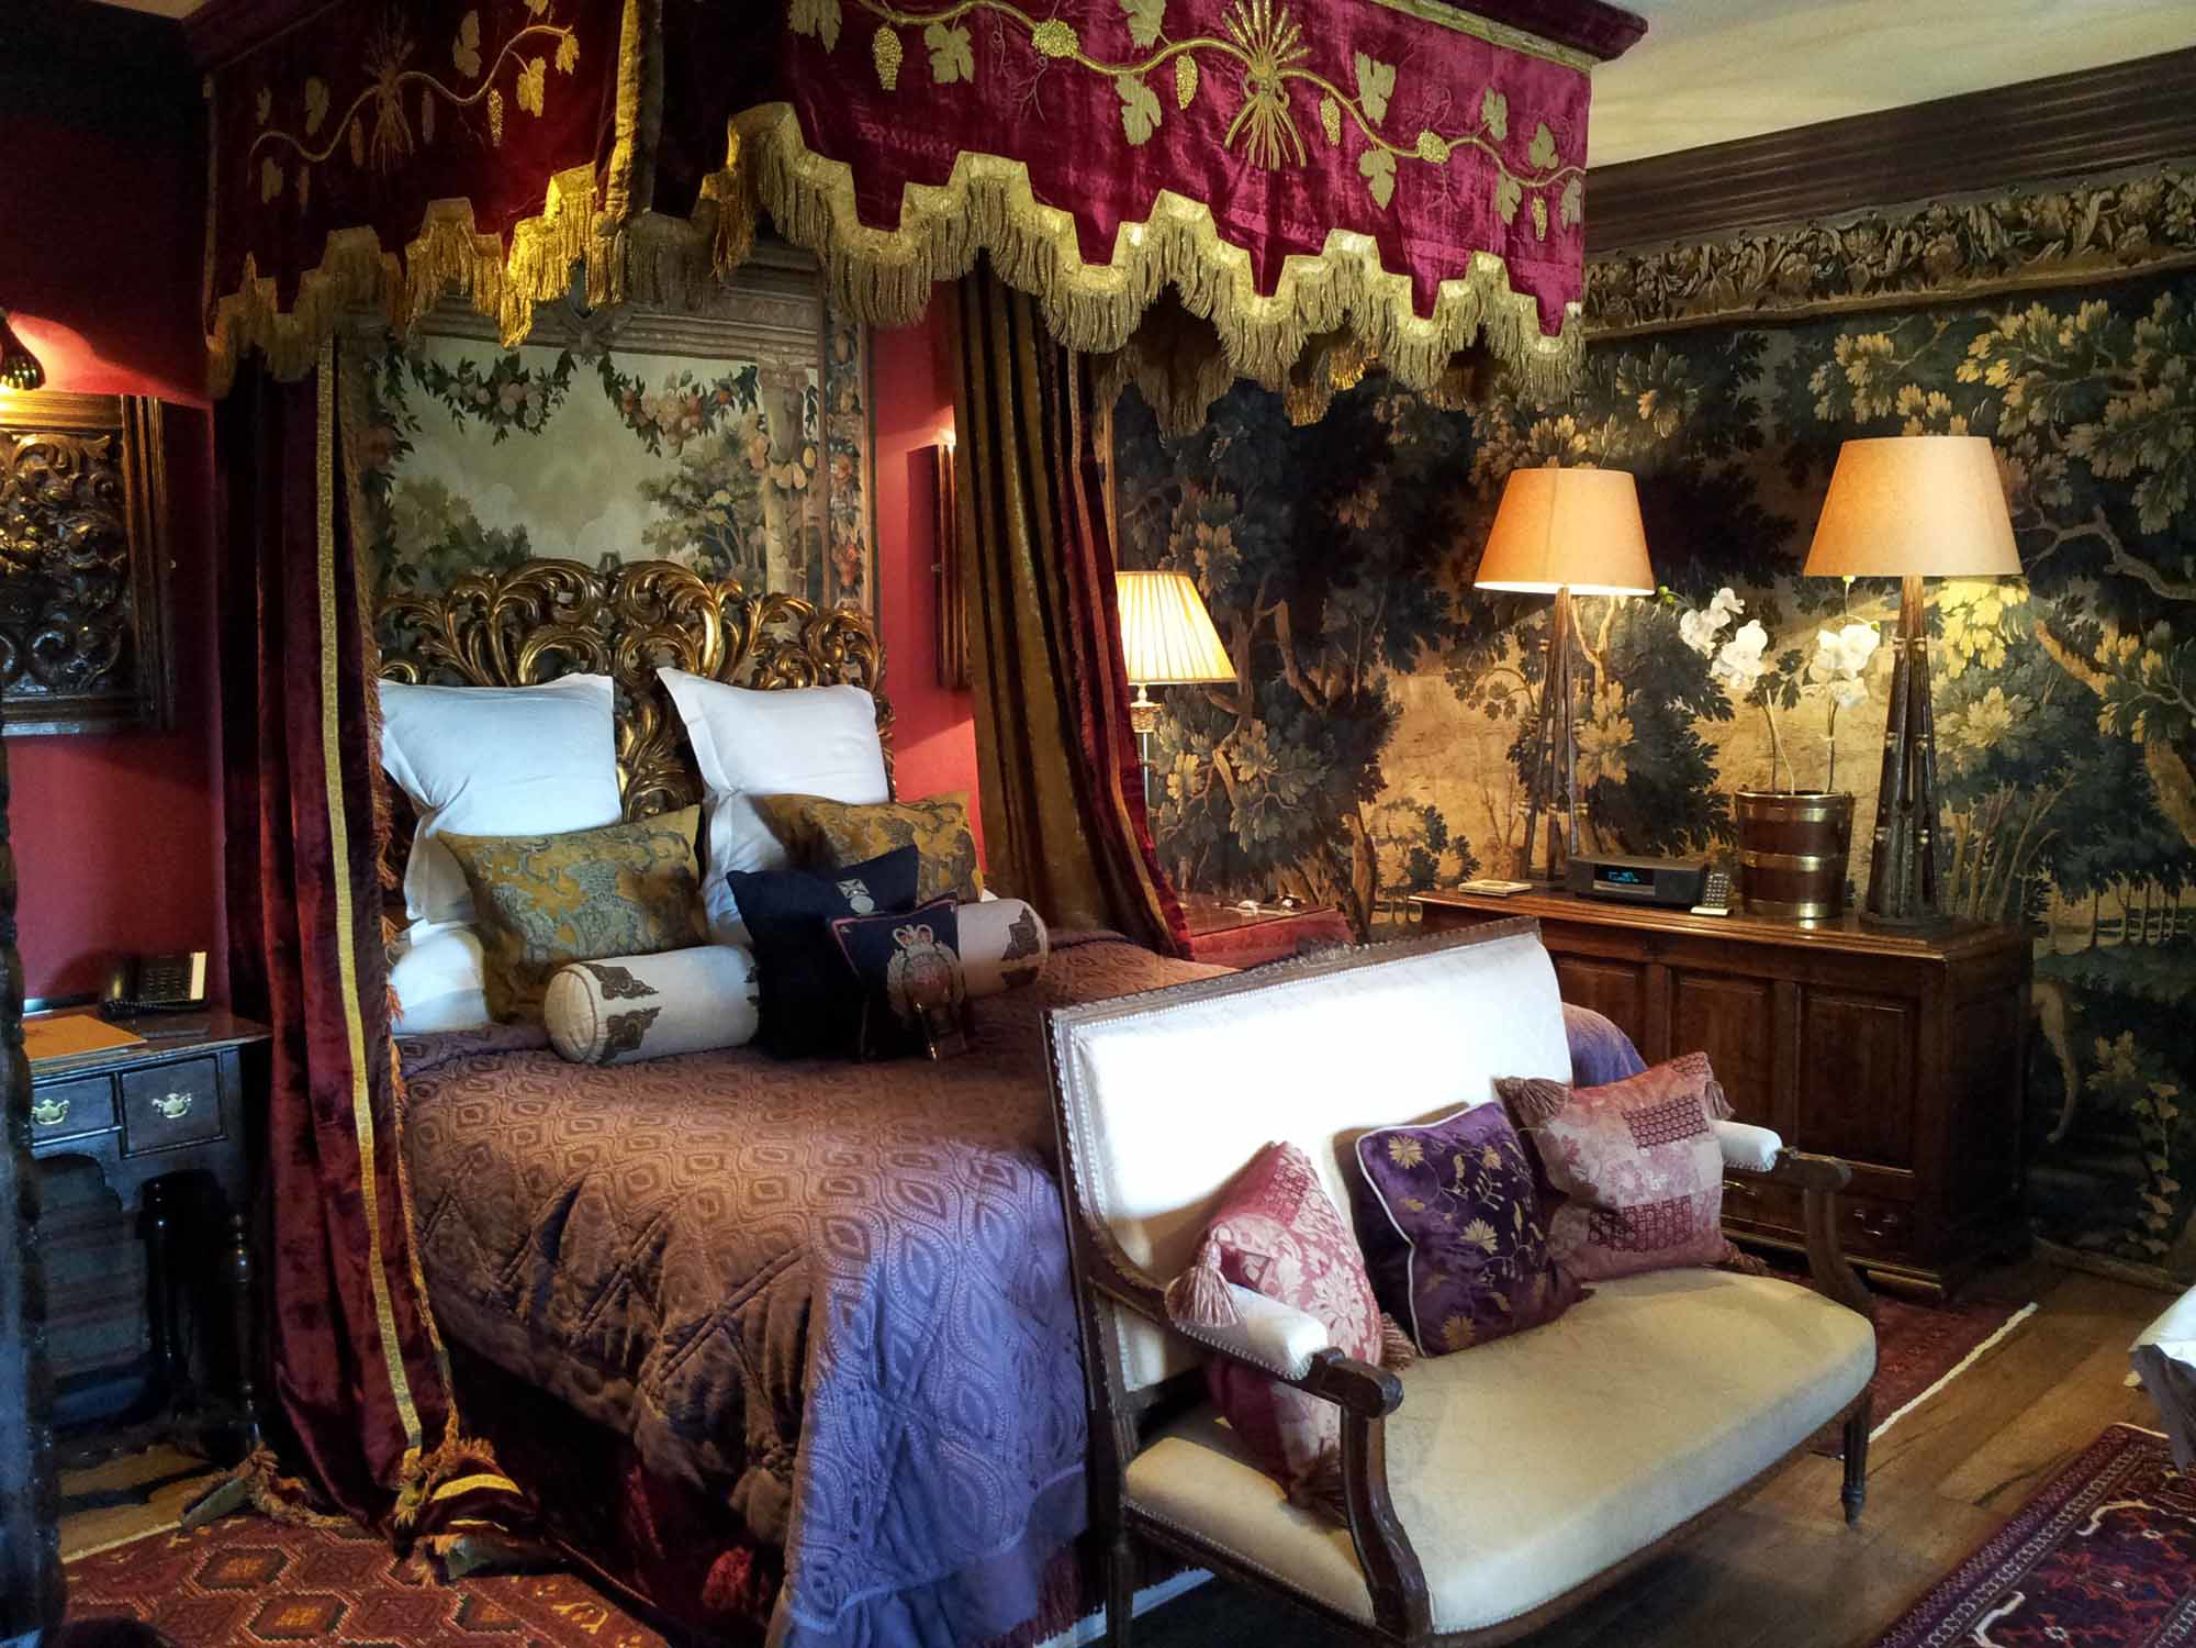 The Witchery by the Castle, Hotels in Edinburgh